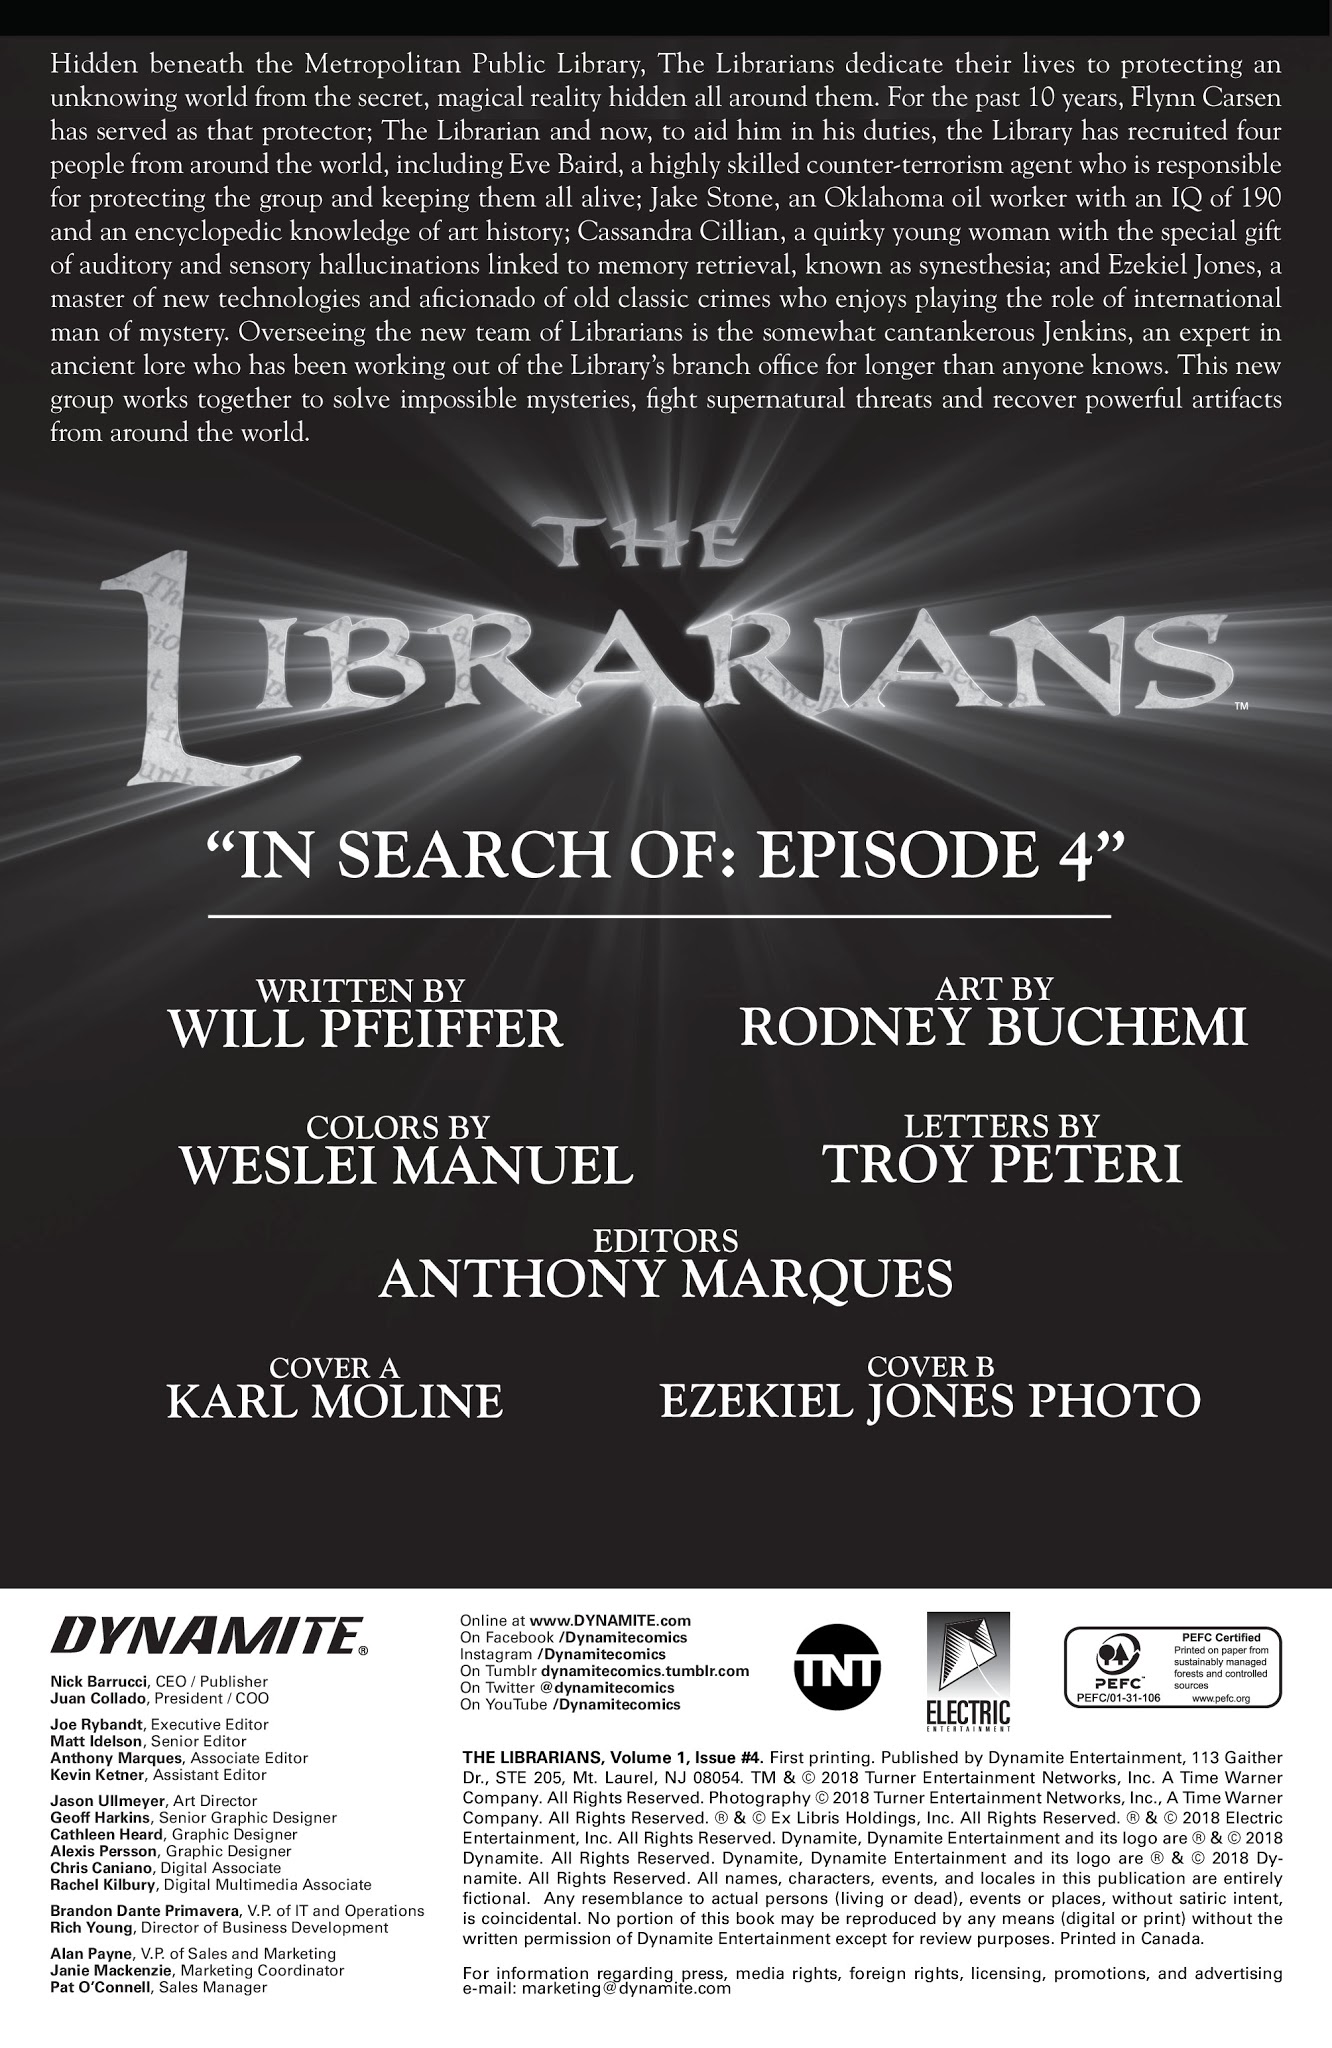 Read online The Librarians comic -  Issue #4 - 3